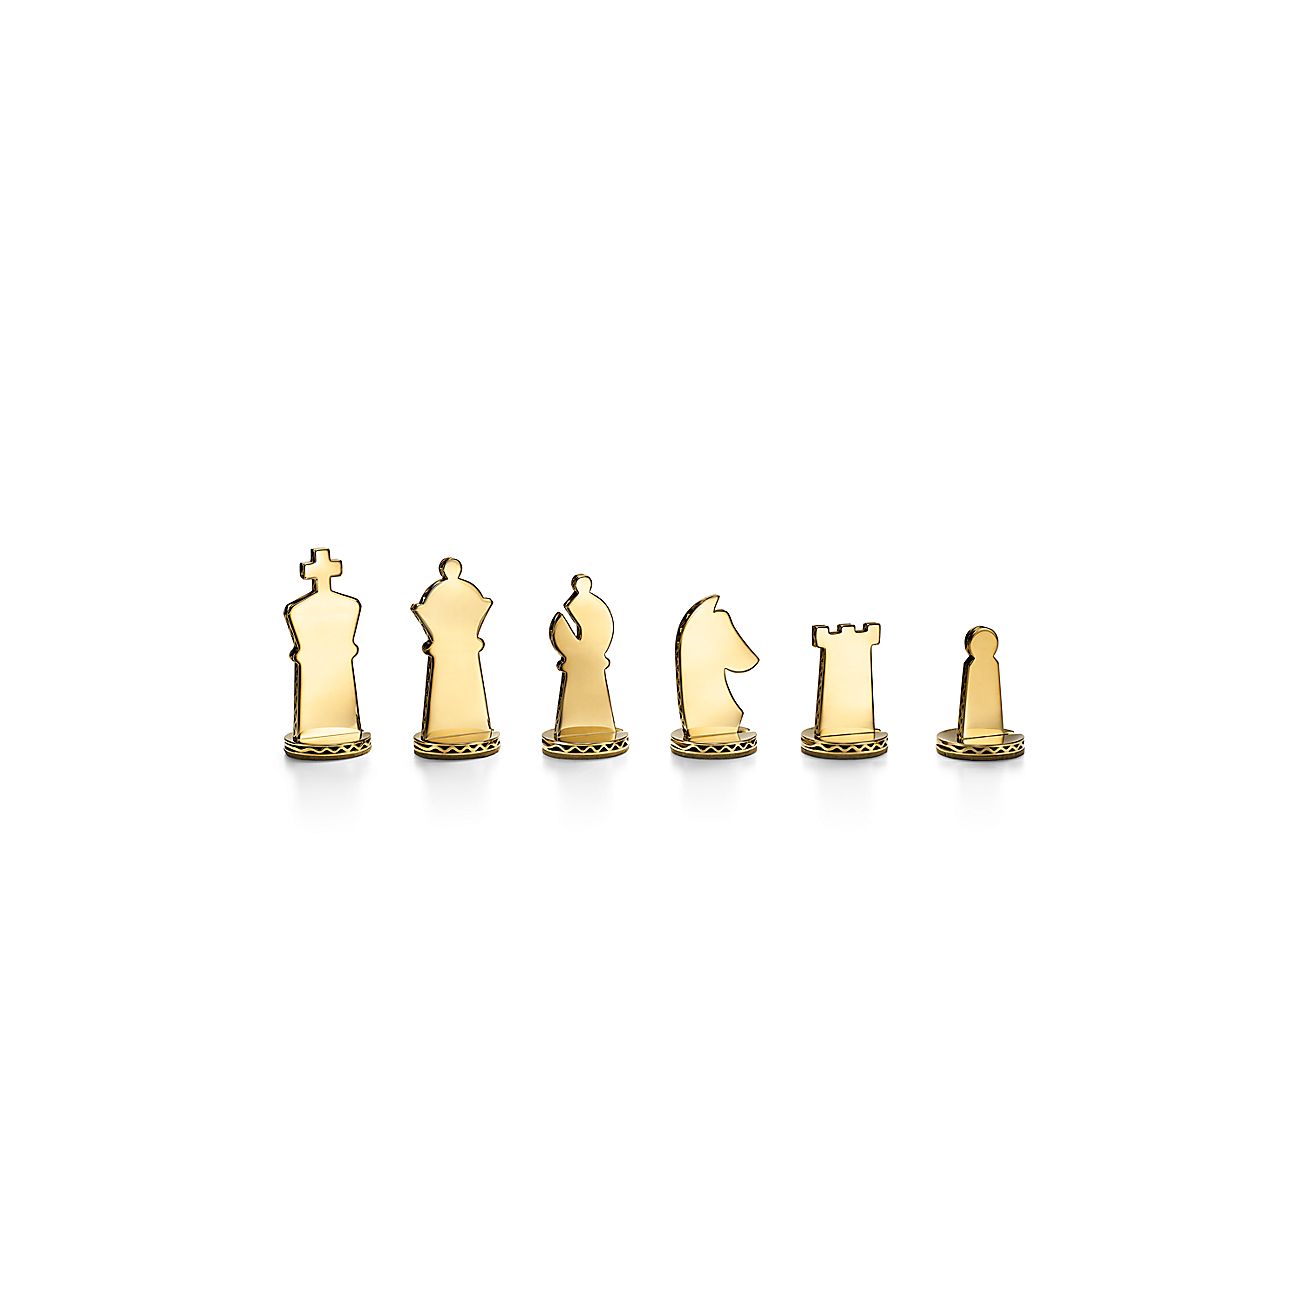 Everyday Objects Sterling Silver And 24K Gold Vermeil Chess Set. | Tiffany  & Co.